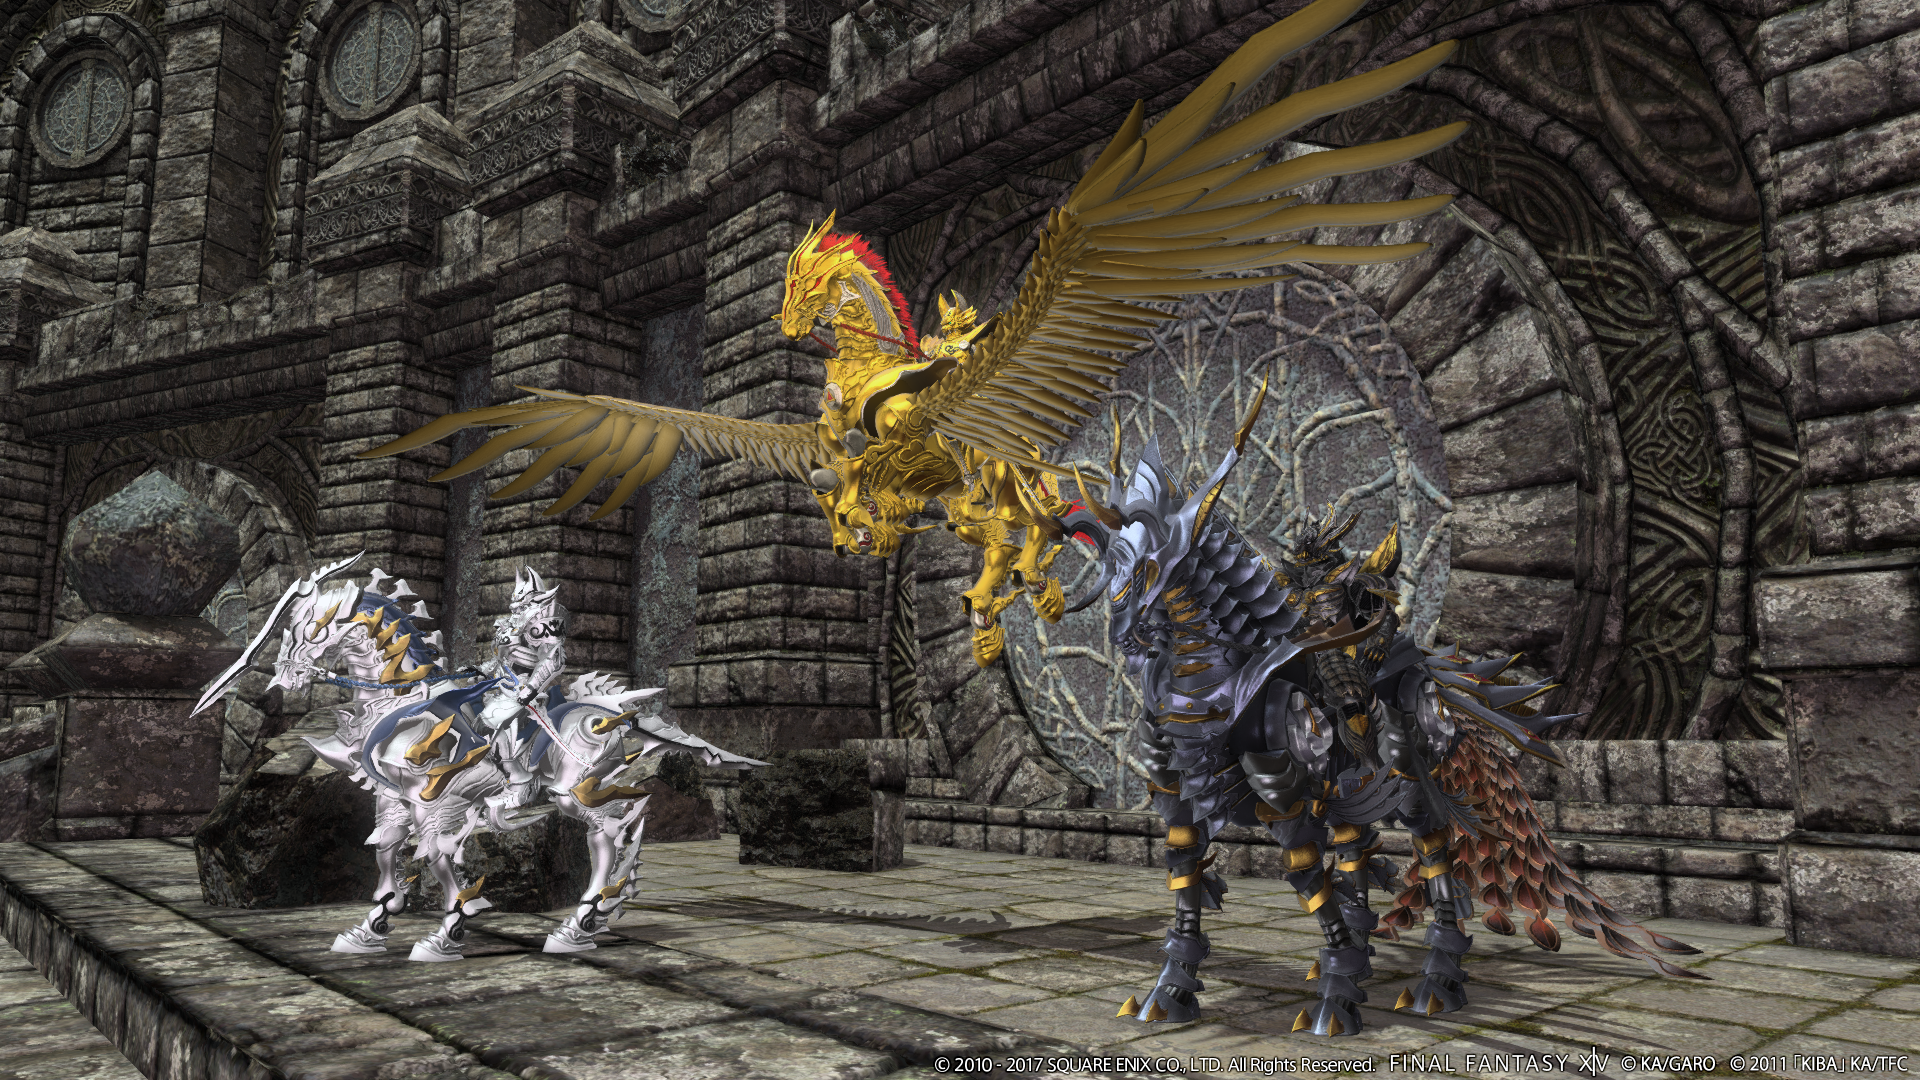 Final Fantasy XIV previews Dun Scaith and side stories.